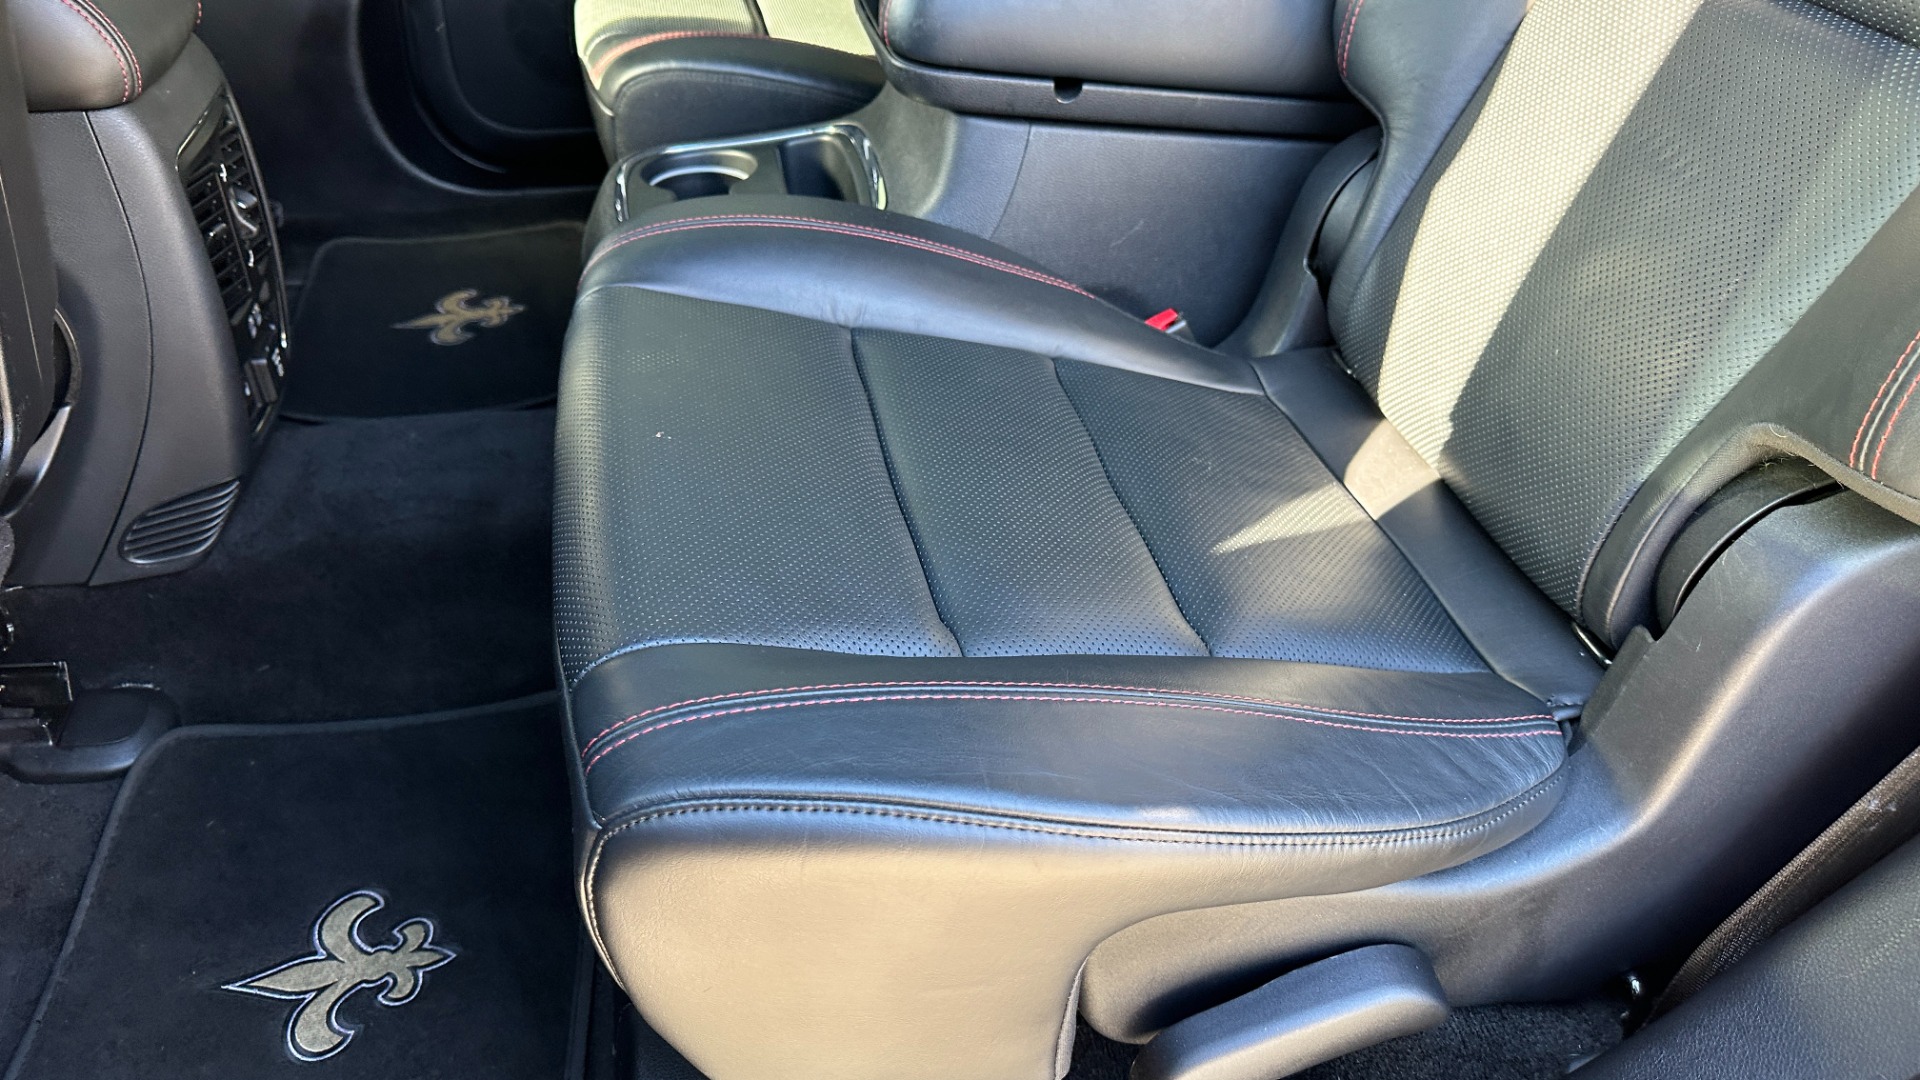 Used 2015 Dodge Durango R/T / HEMI V8 / CAPTAINS CHAIRS / 3 ROW SEATING / TECH PKG / NAPPA LEATHER  for sale $23,995 at Formula Imports in Charlotte NC 28227 27